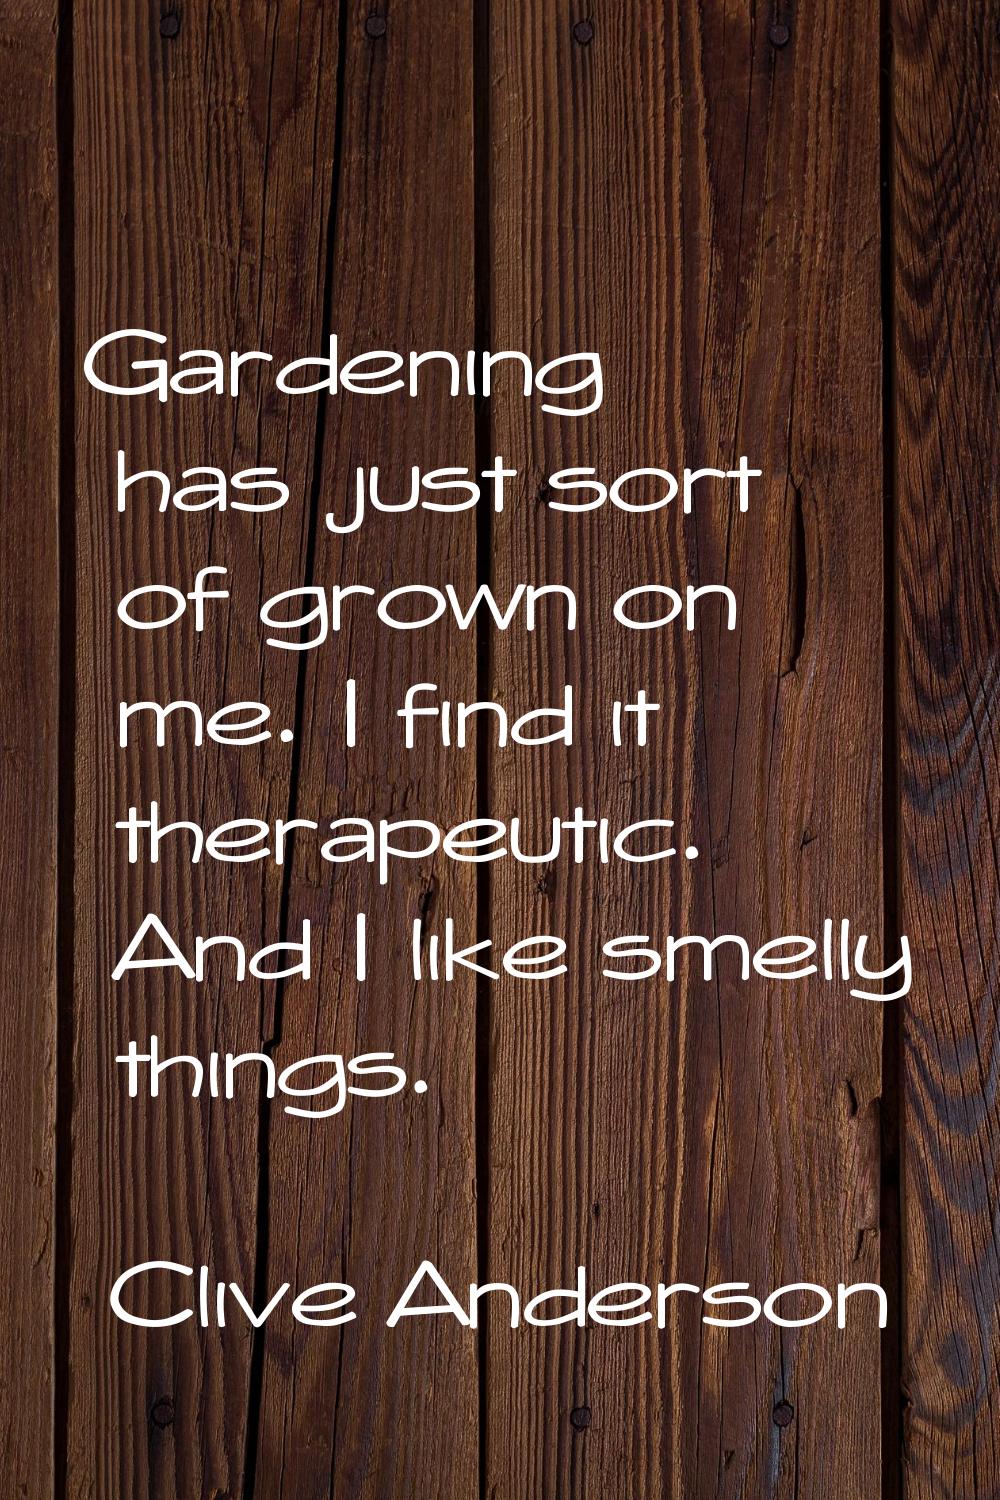 Gardening has just sort of grown on me. I find it therapeutic. And I like smelly things.